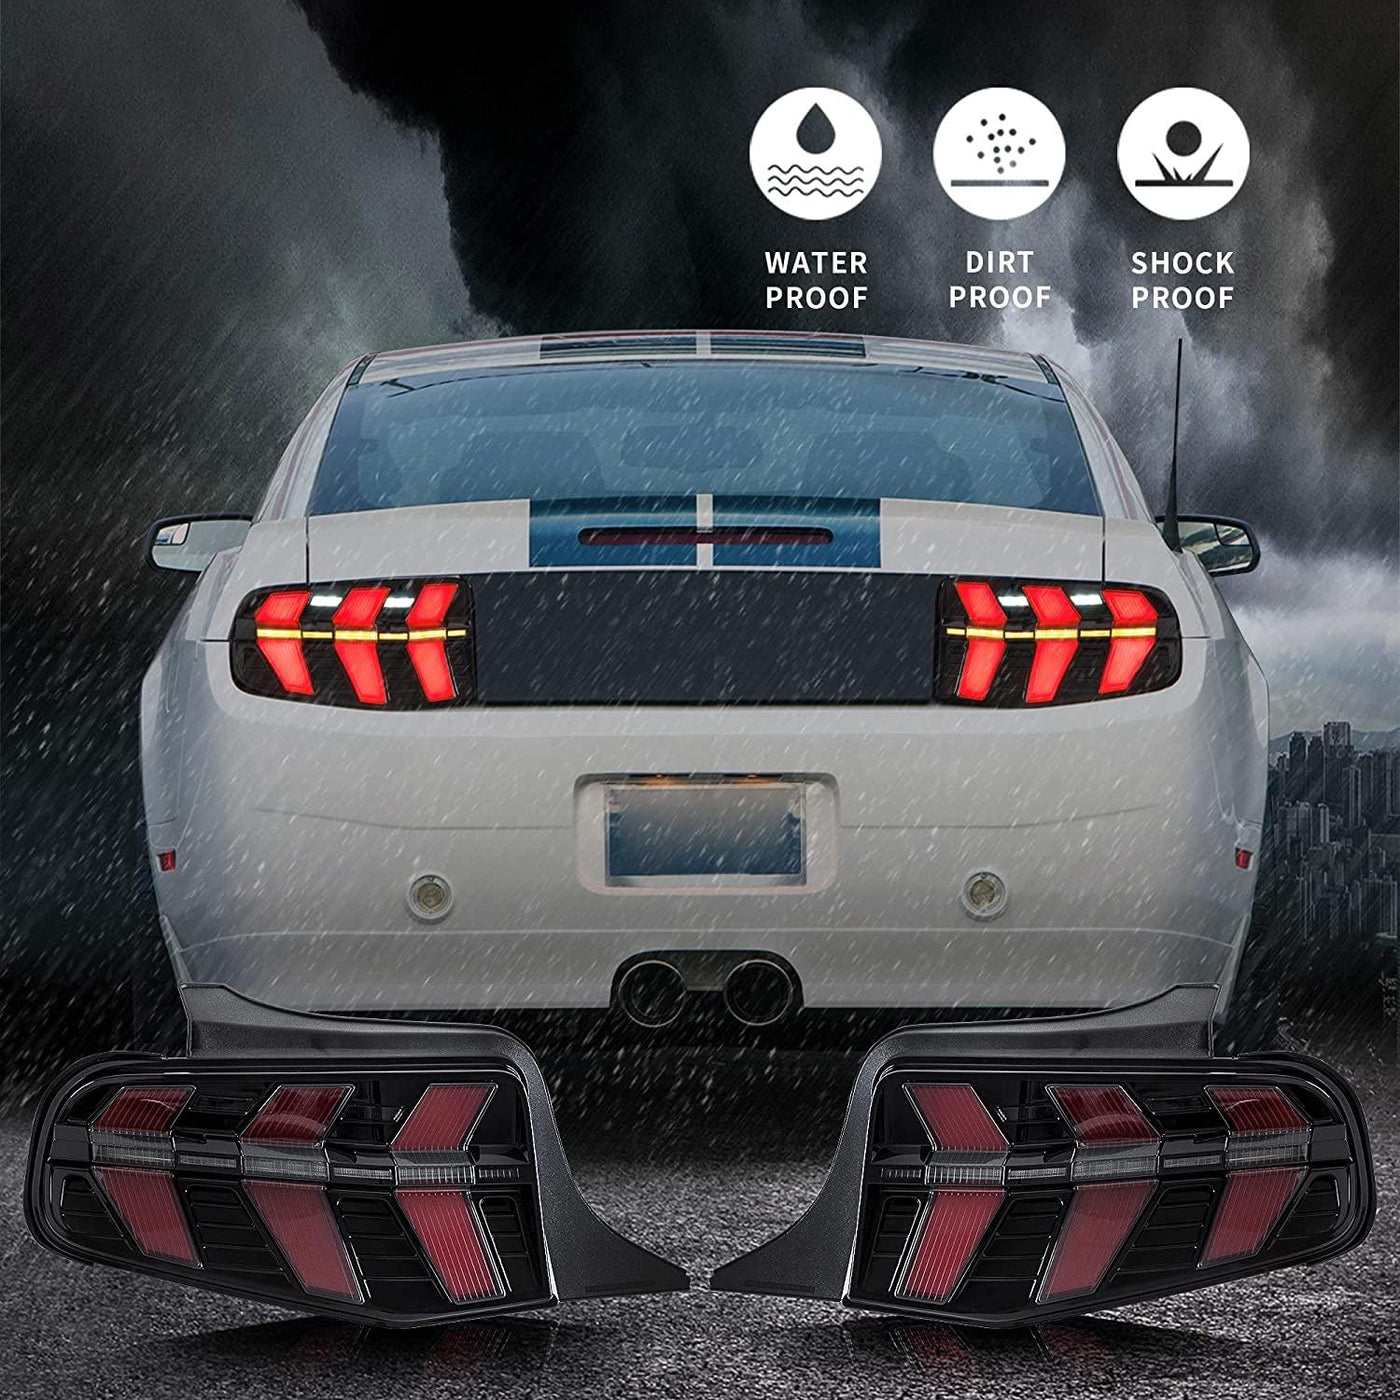 VLAND LED Tail Lights For Ford Mustang 2010 2011 2012 with 7 Lighting Modes [DOT.]